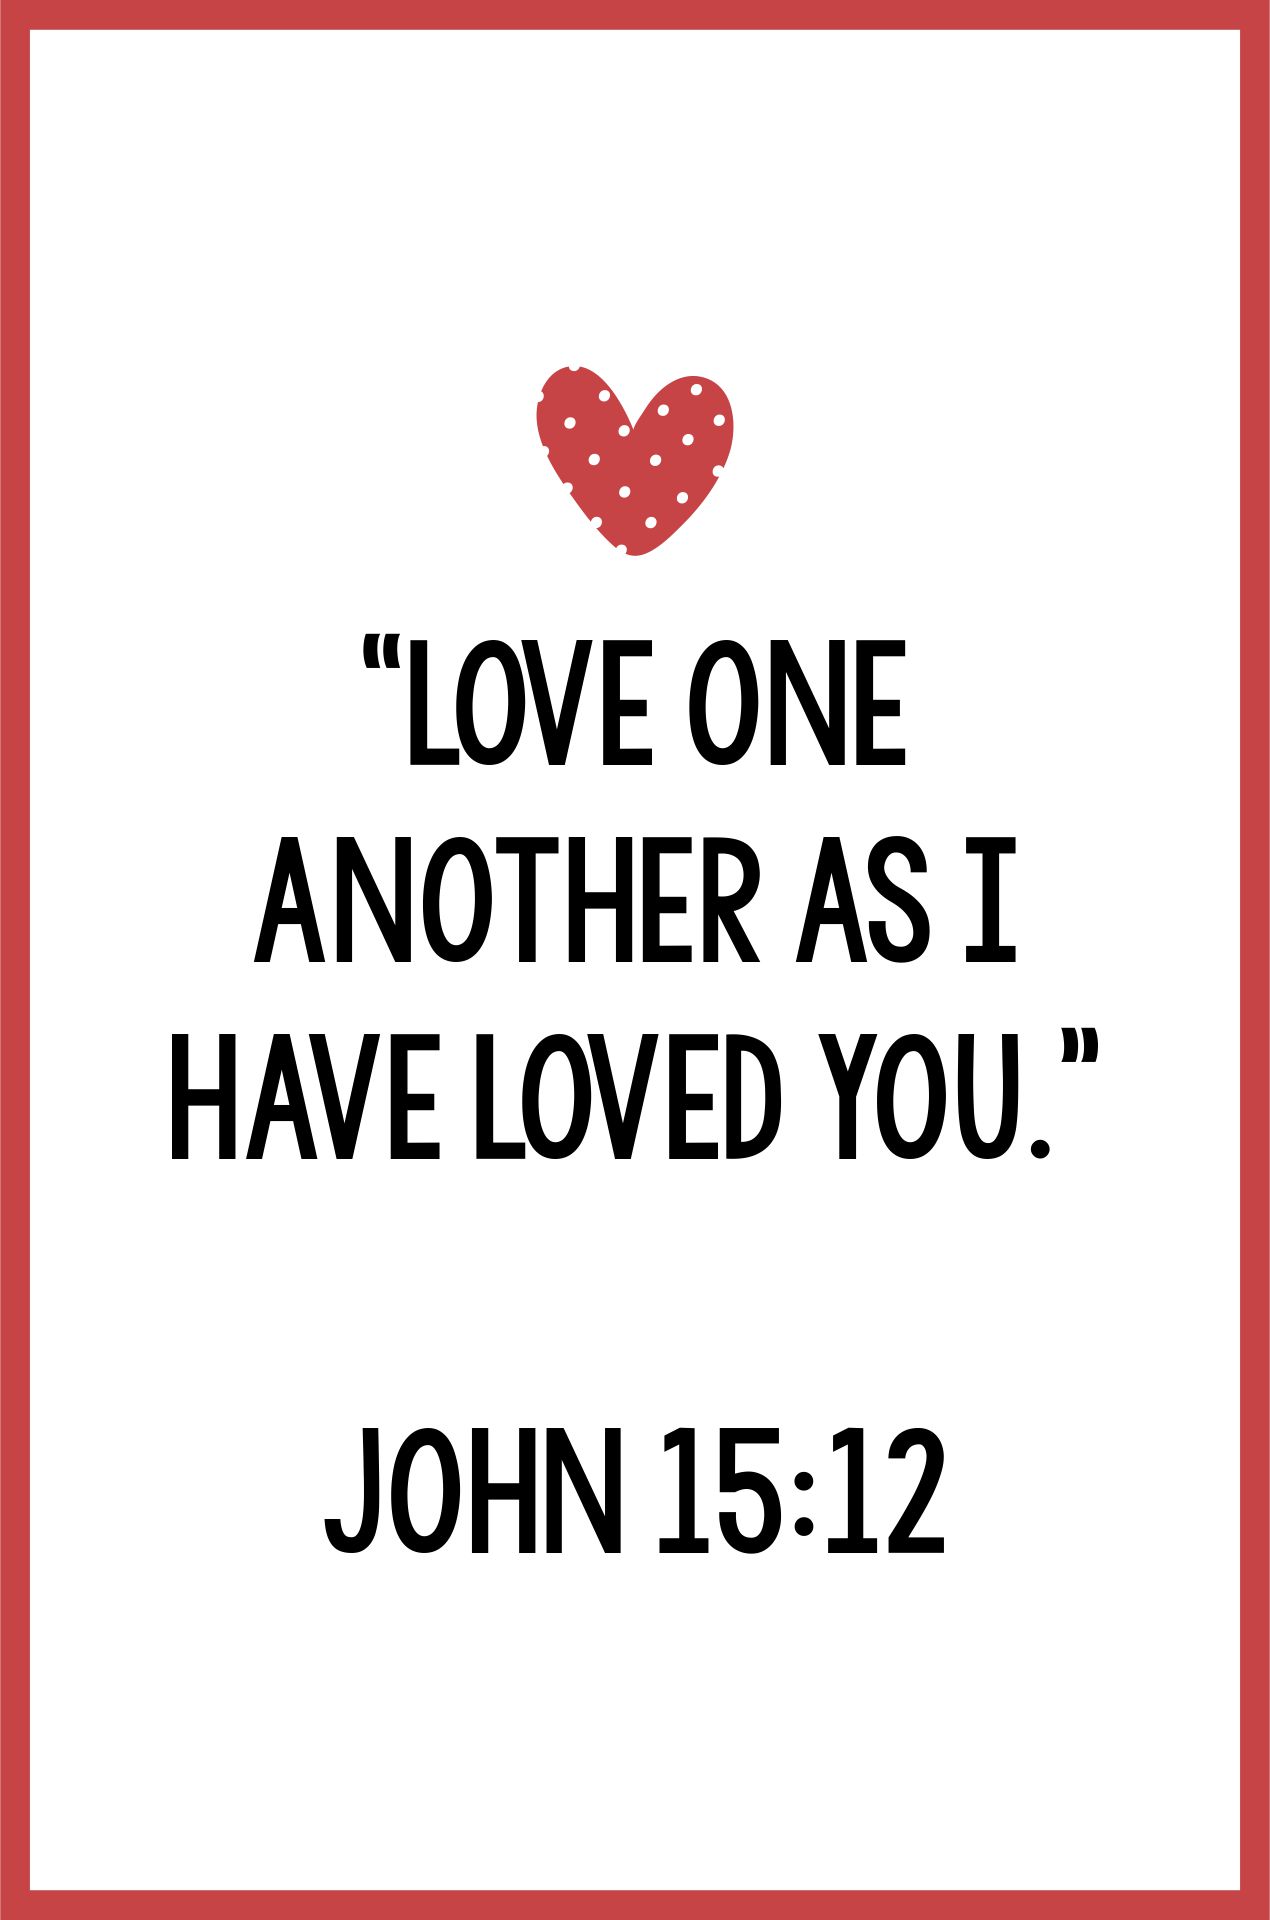 Printable Bible Verse Valentines Cards For Kids